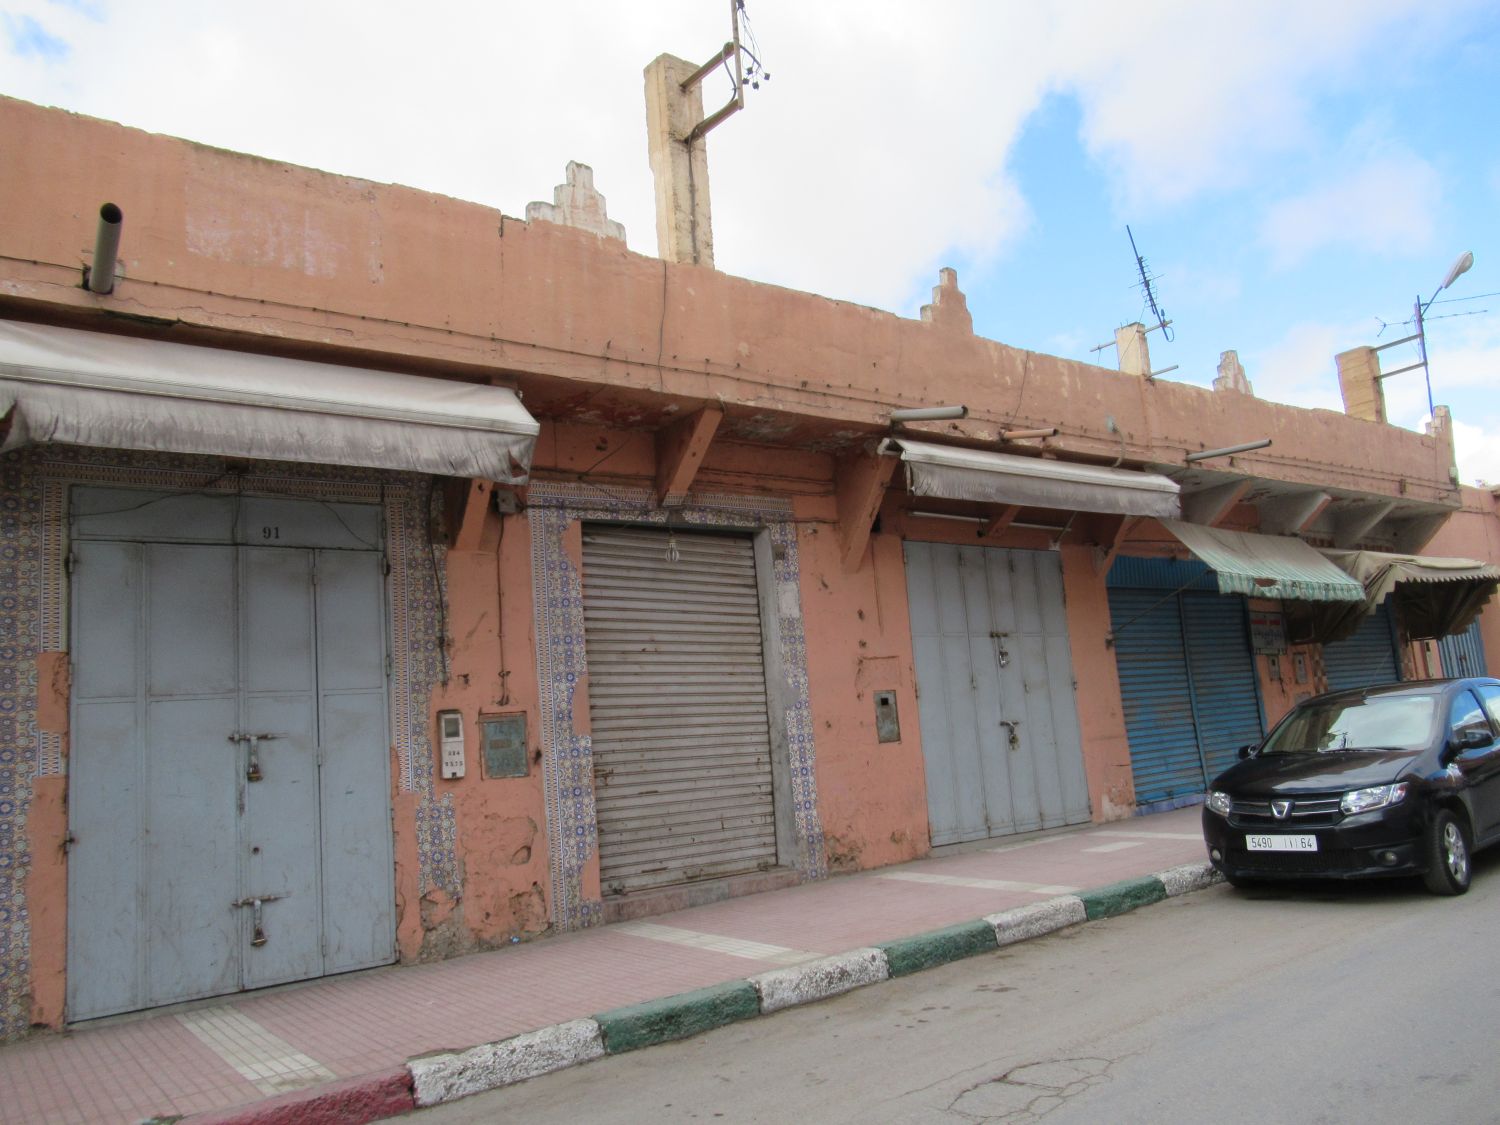 Old shops in Guelmim.